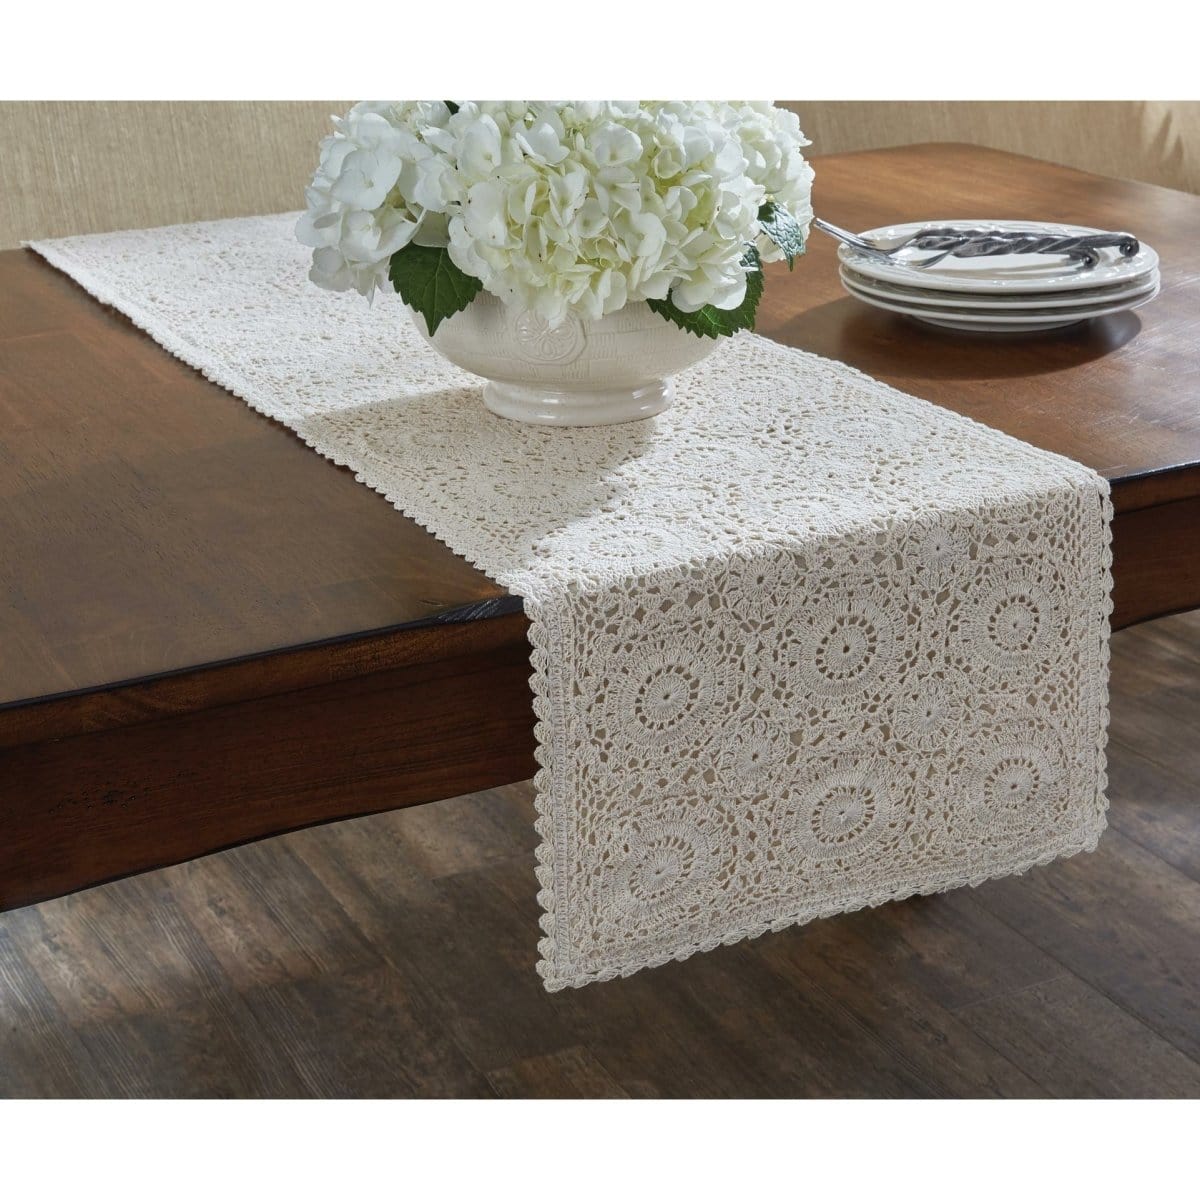 Lace in Cream Crocheted Table Runner 36&quot; Long-Park Designs-The Village Merchant